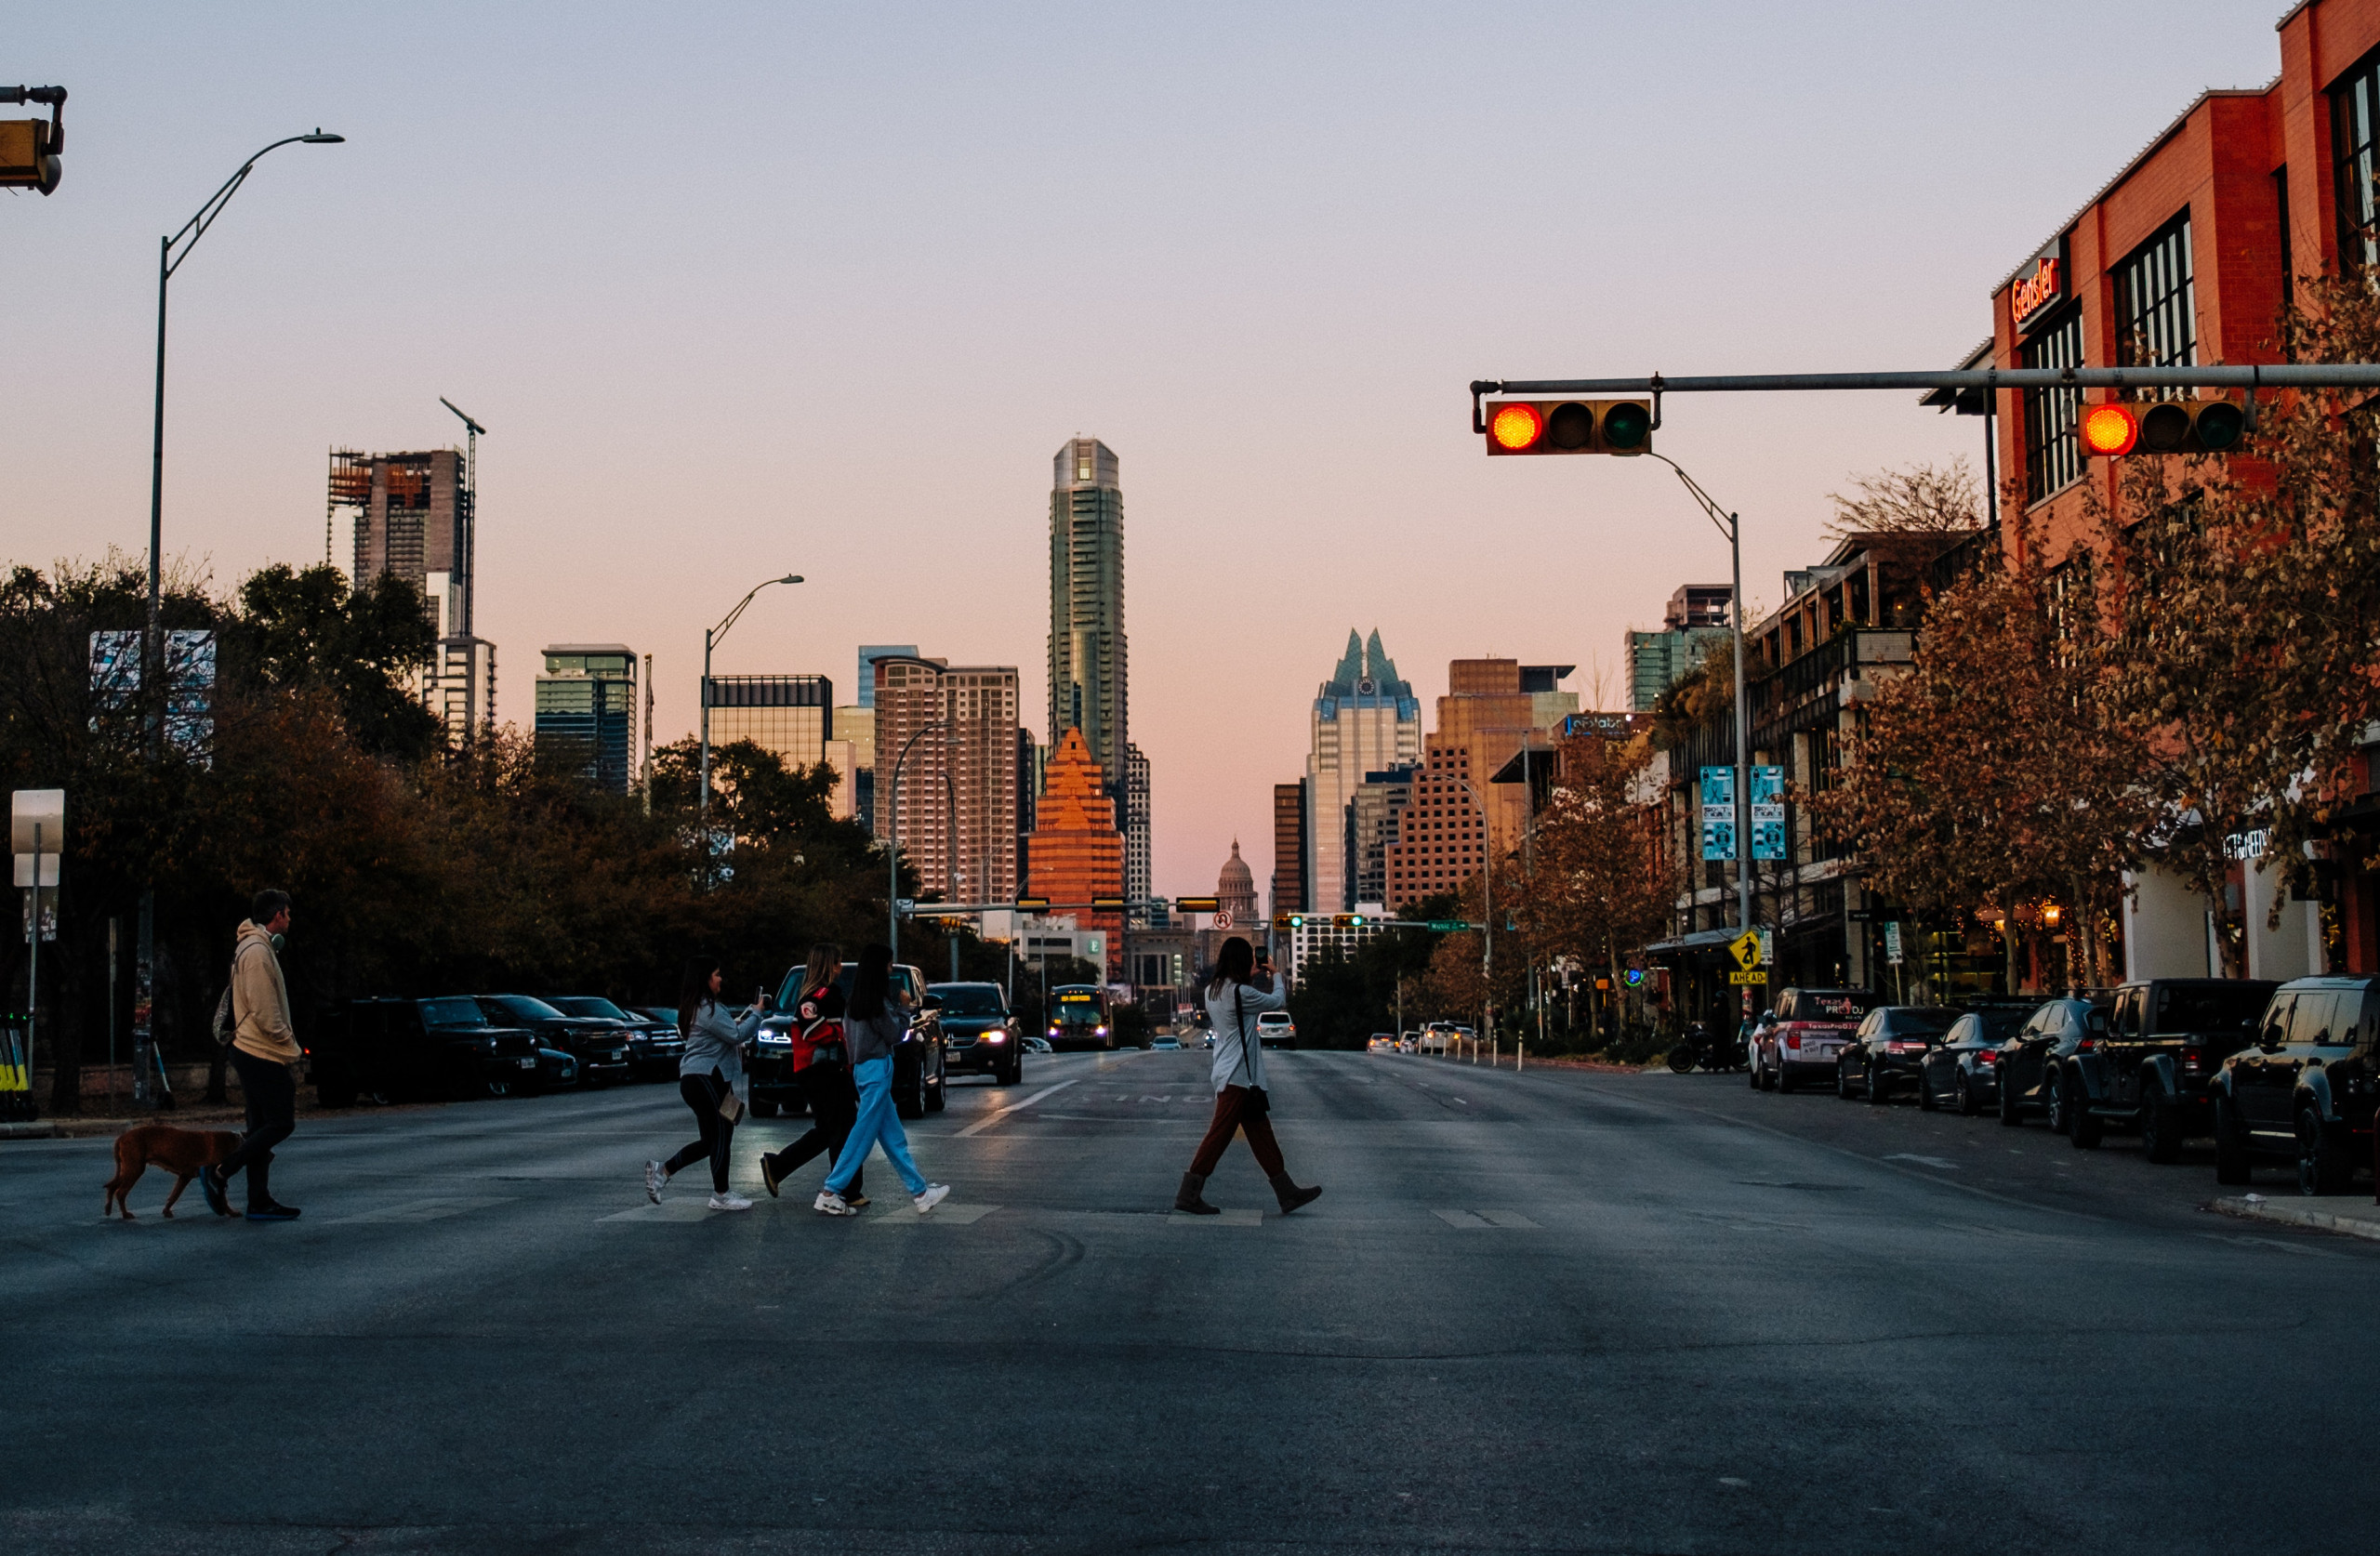 Sunset on the streets of Austin, Texas